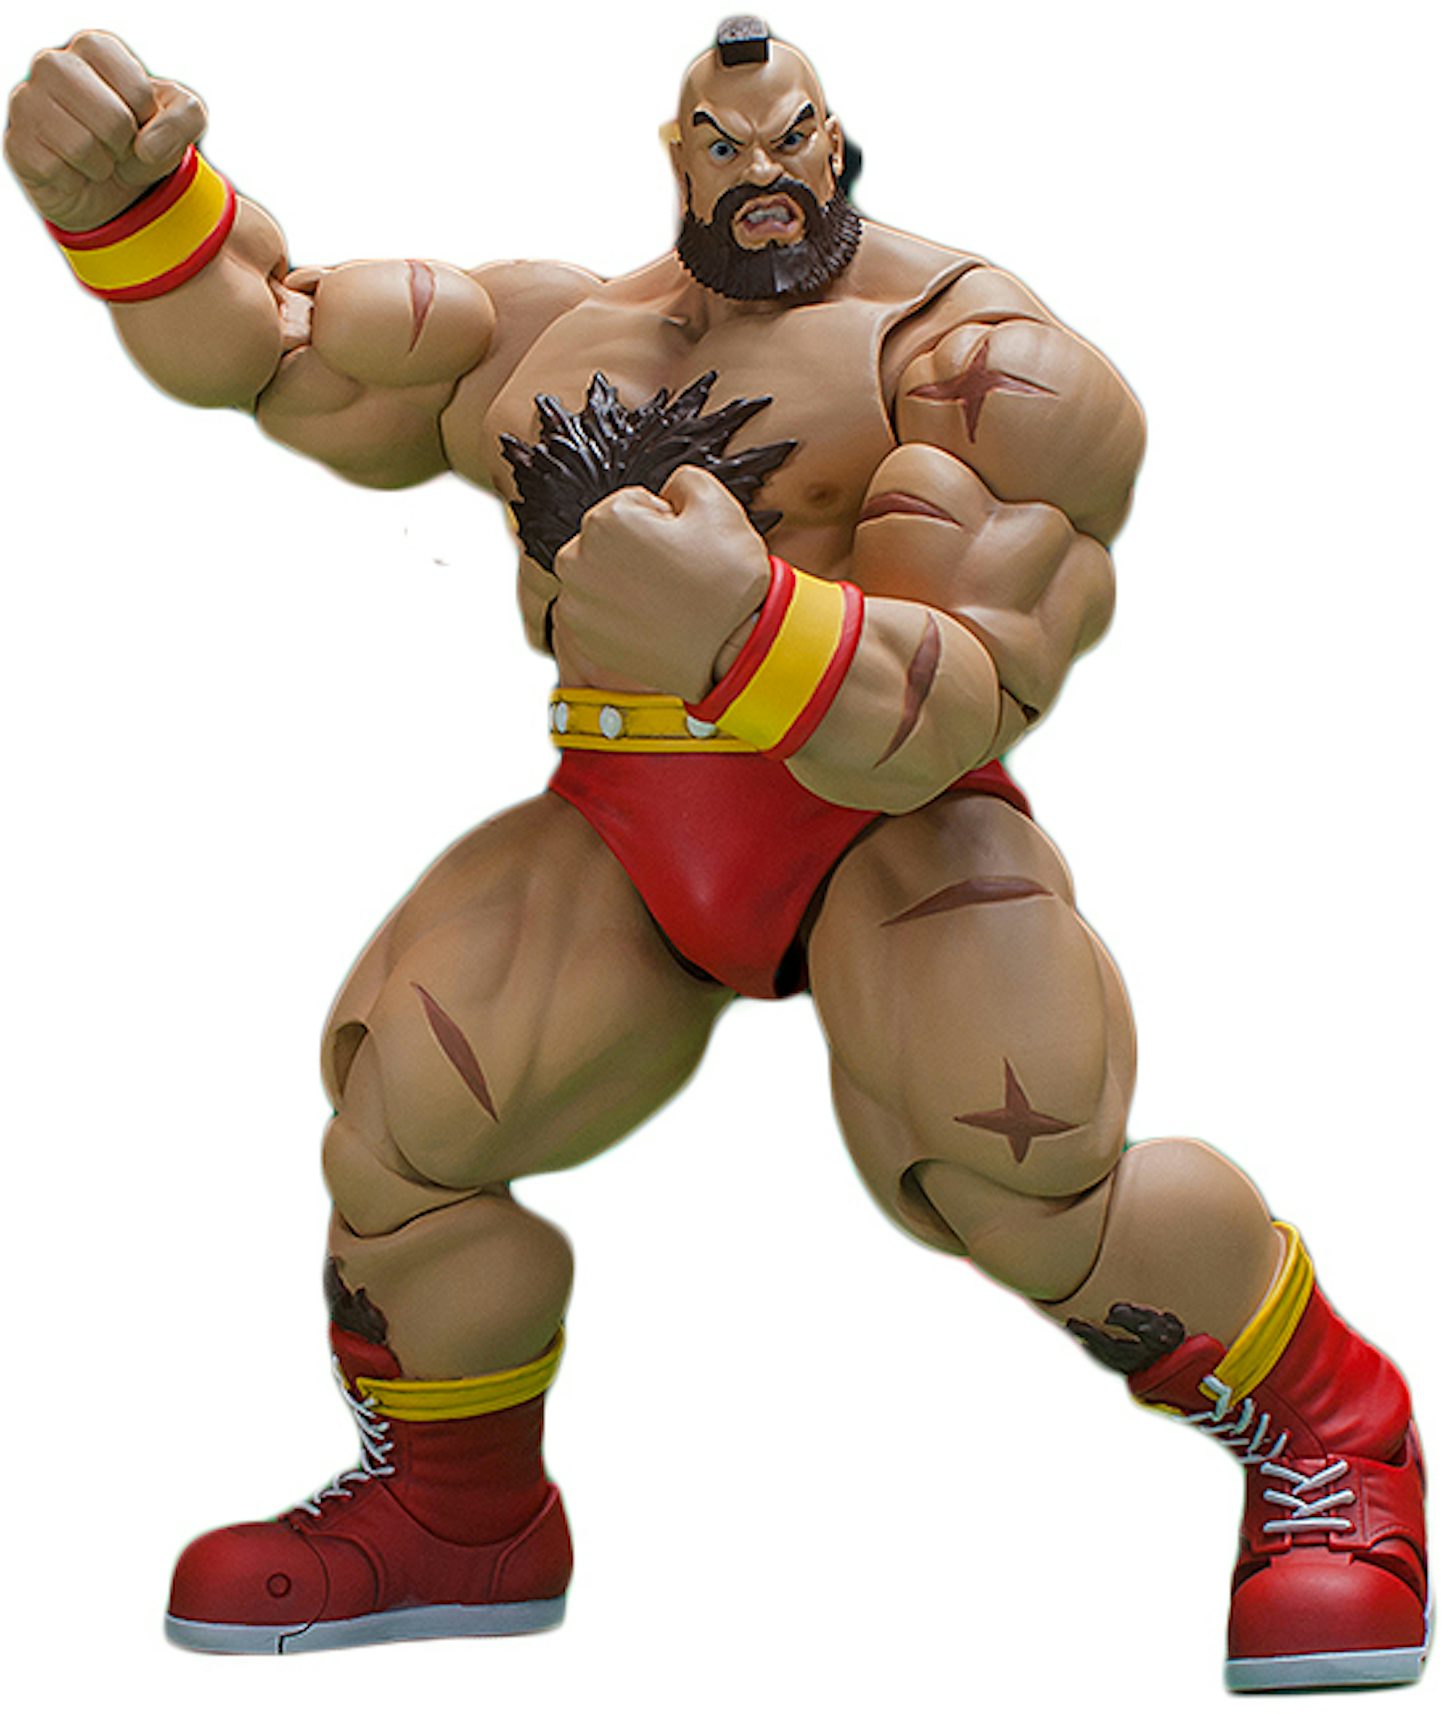 Storm Collectibles Ultimate Street Fighter II The Final Challenger Zangief  Action Figure Tan - US